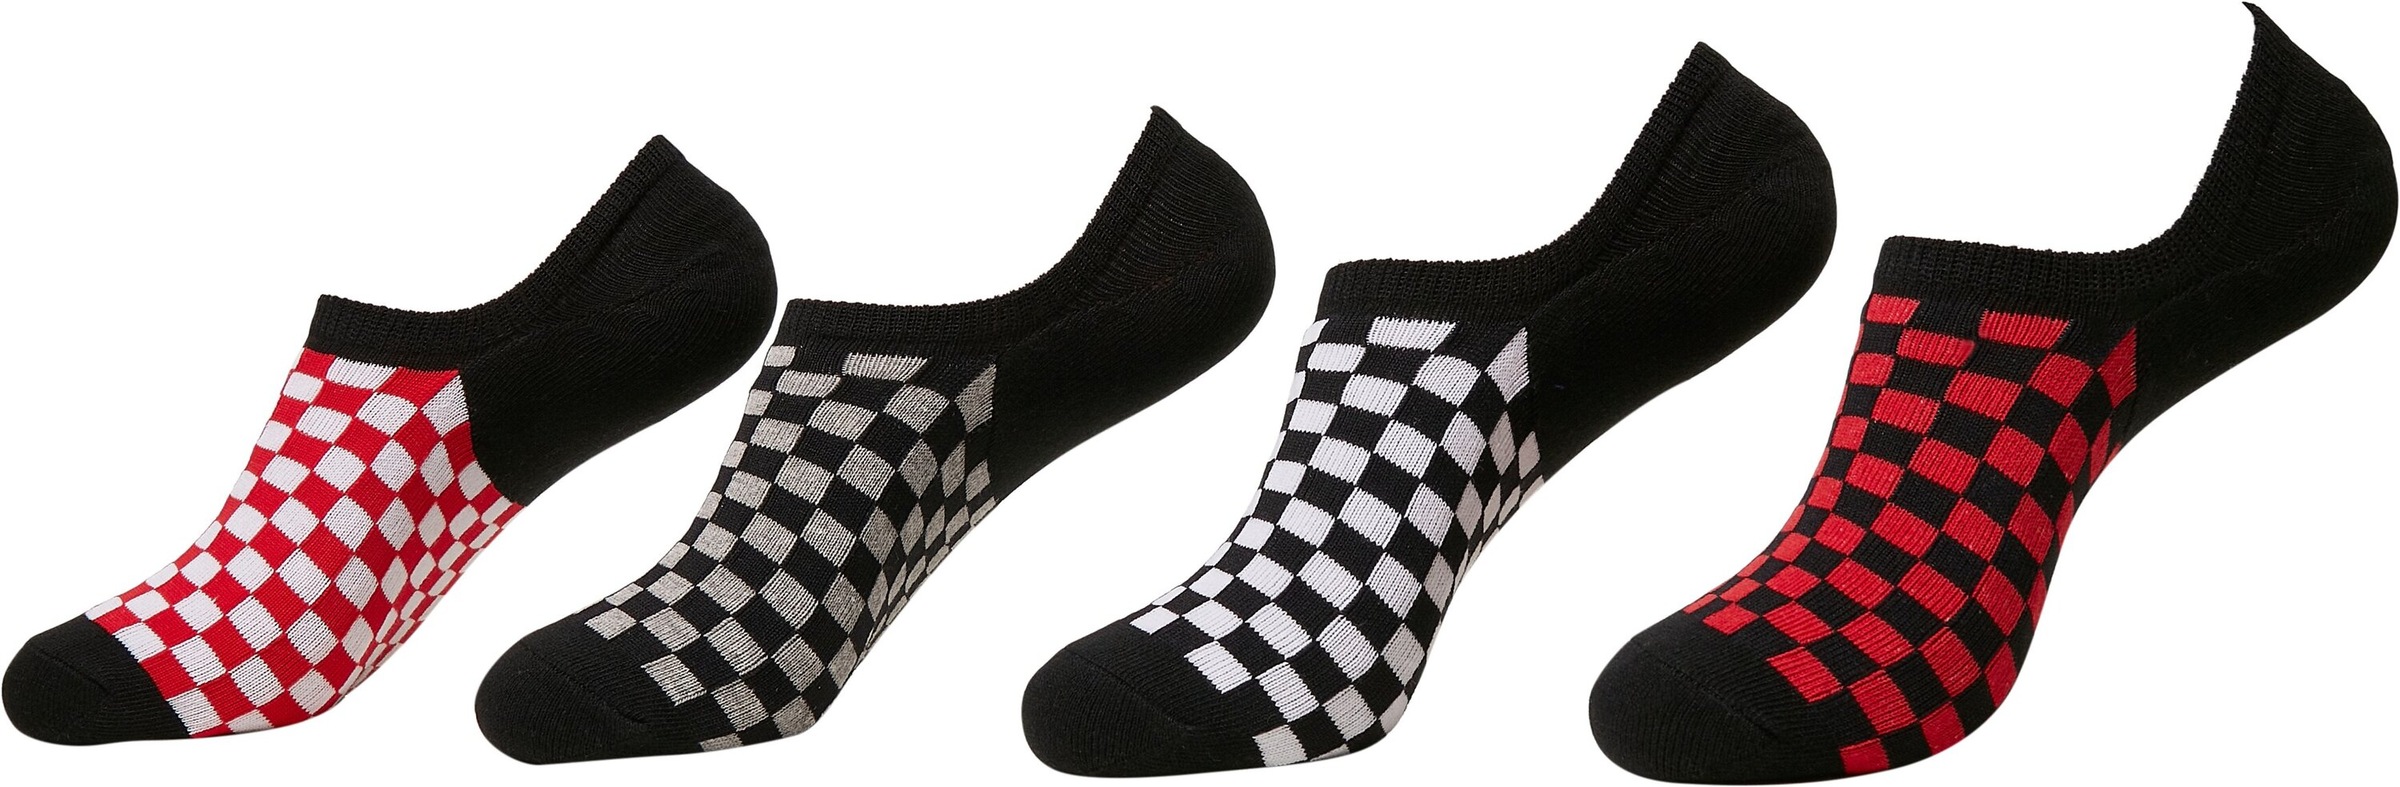 URBAN CLASSICS Freizeitsocken Recycled Paar) Yarn Socks Check Accessoires Invisible (1 4-Pack